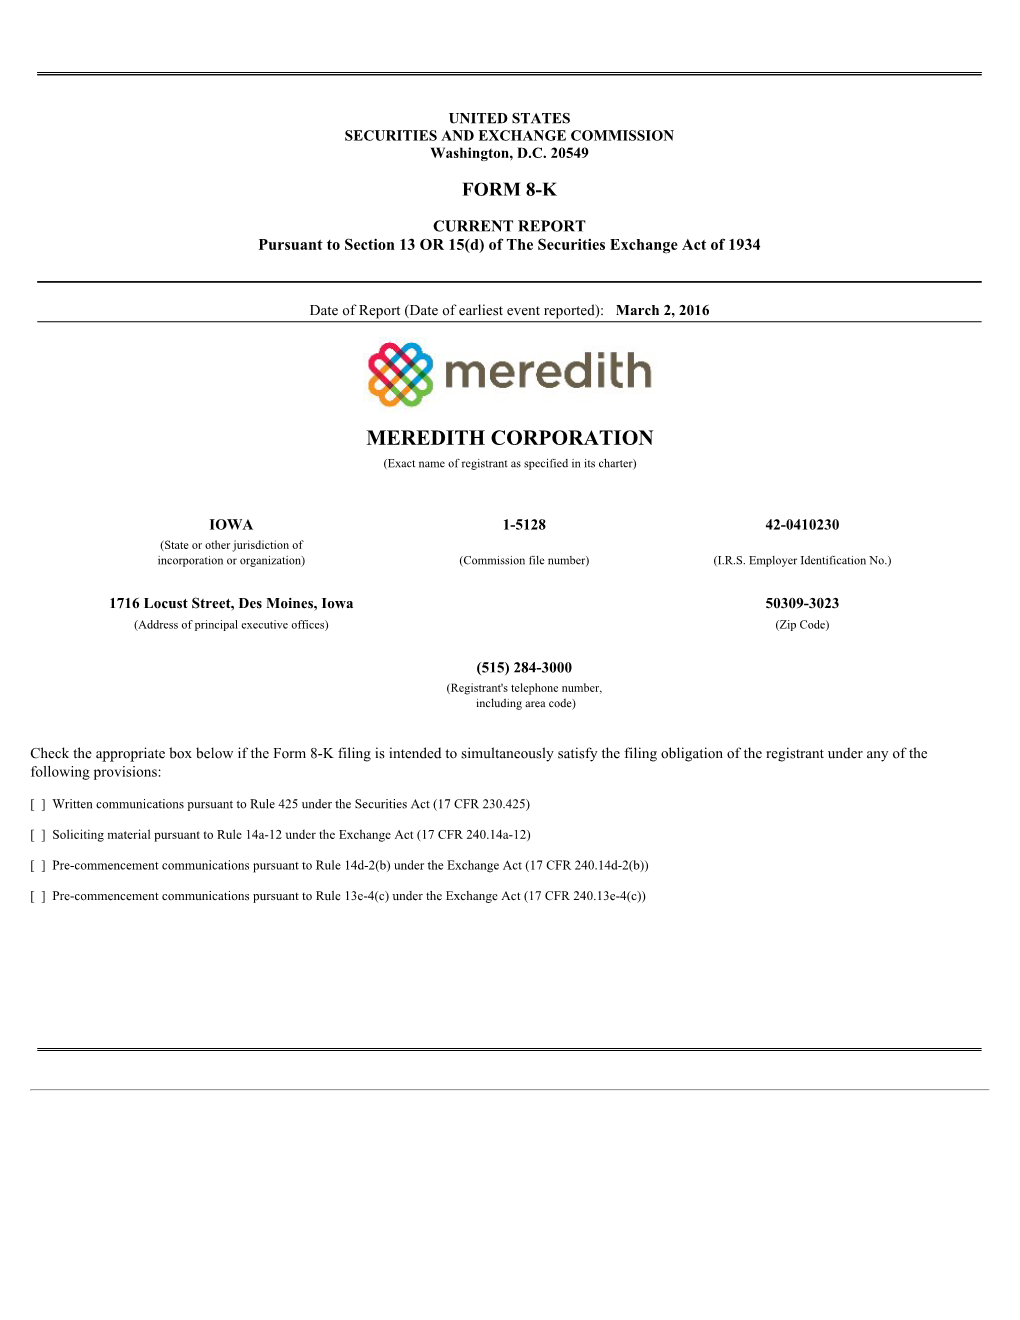 MEREDITH CORPORATION (Exact Name of Registrant As Specified in Its Charter)